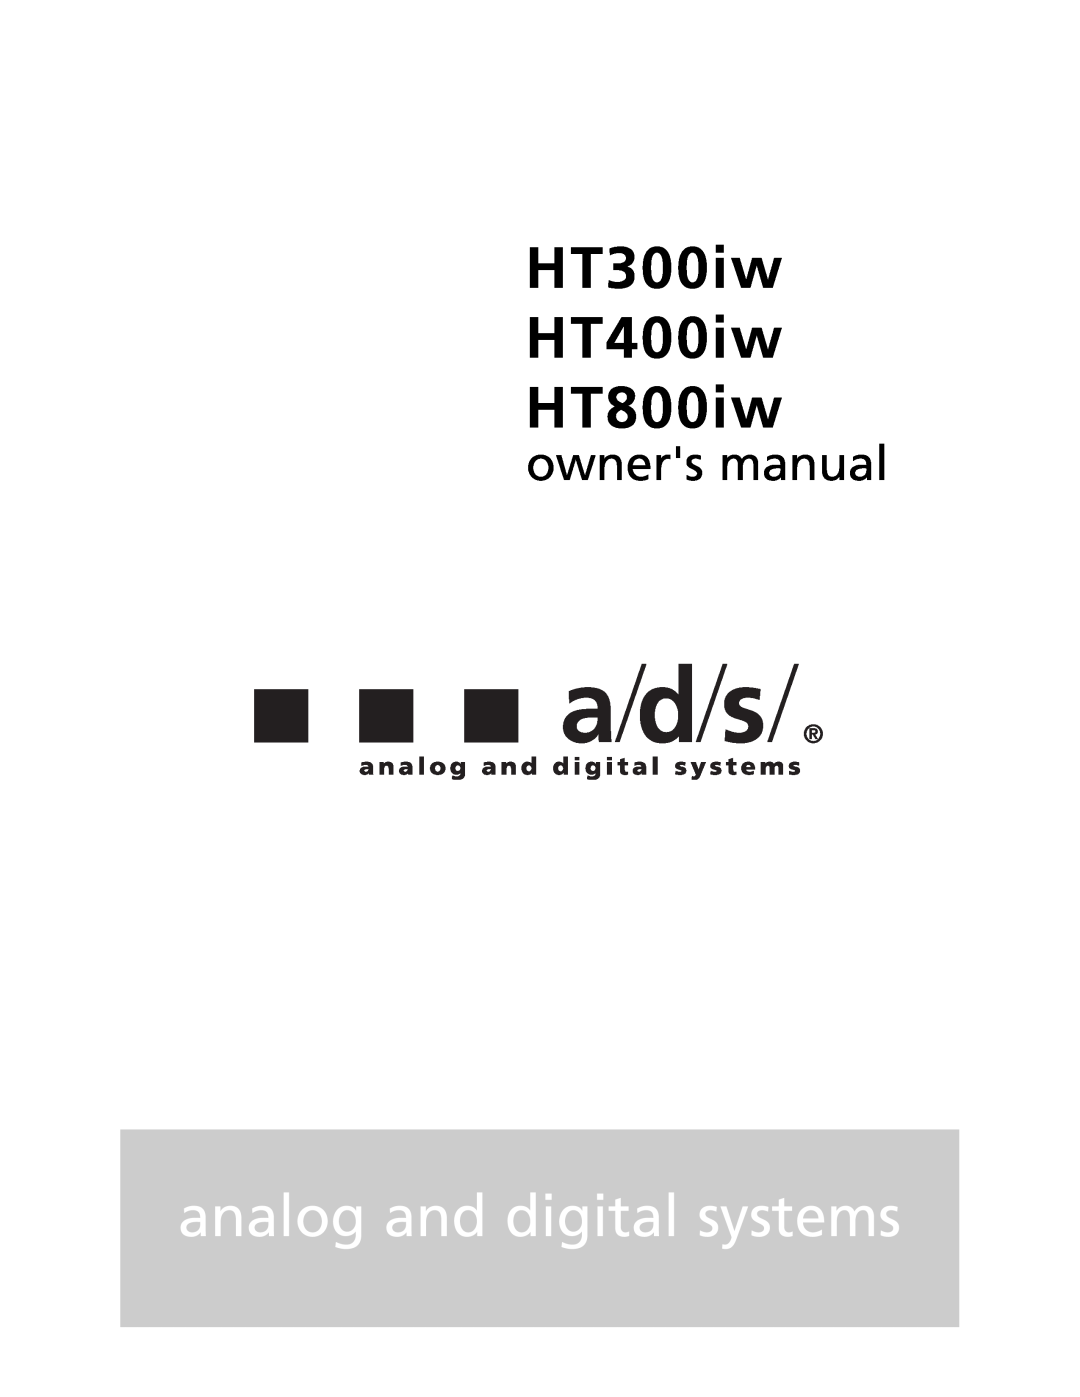 a/d/s/ HT800IW owner manual analog and digital systems, HT300iw HT400iw HT800iw 